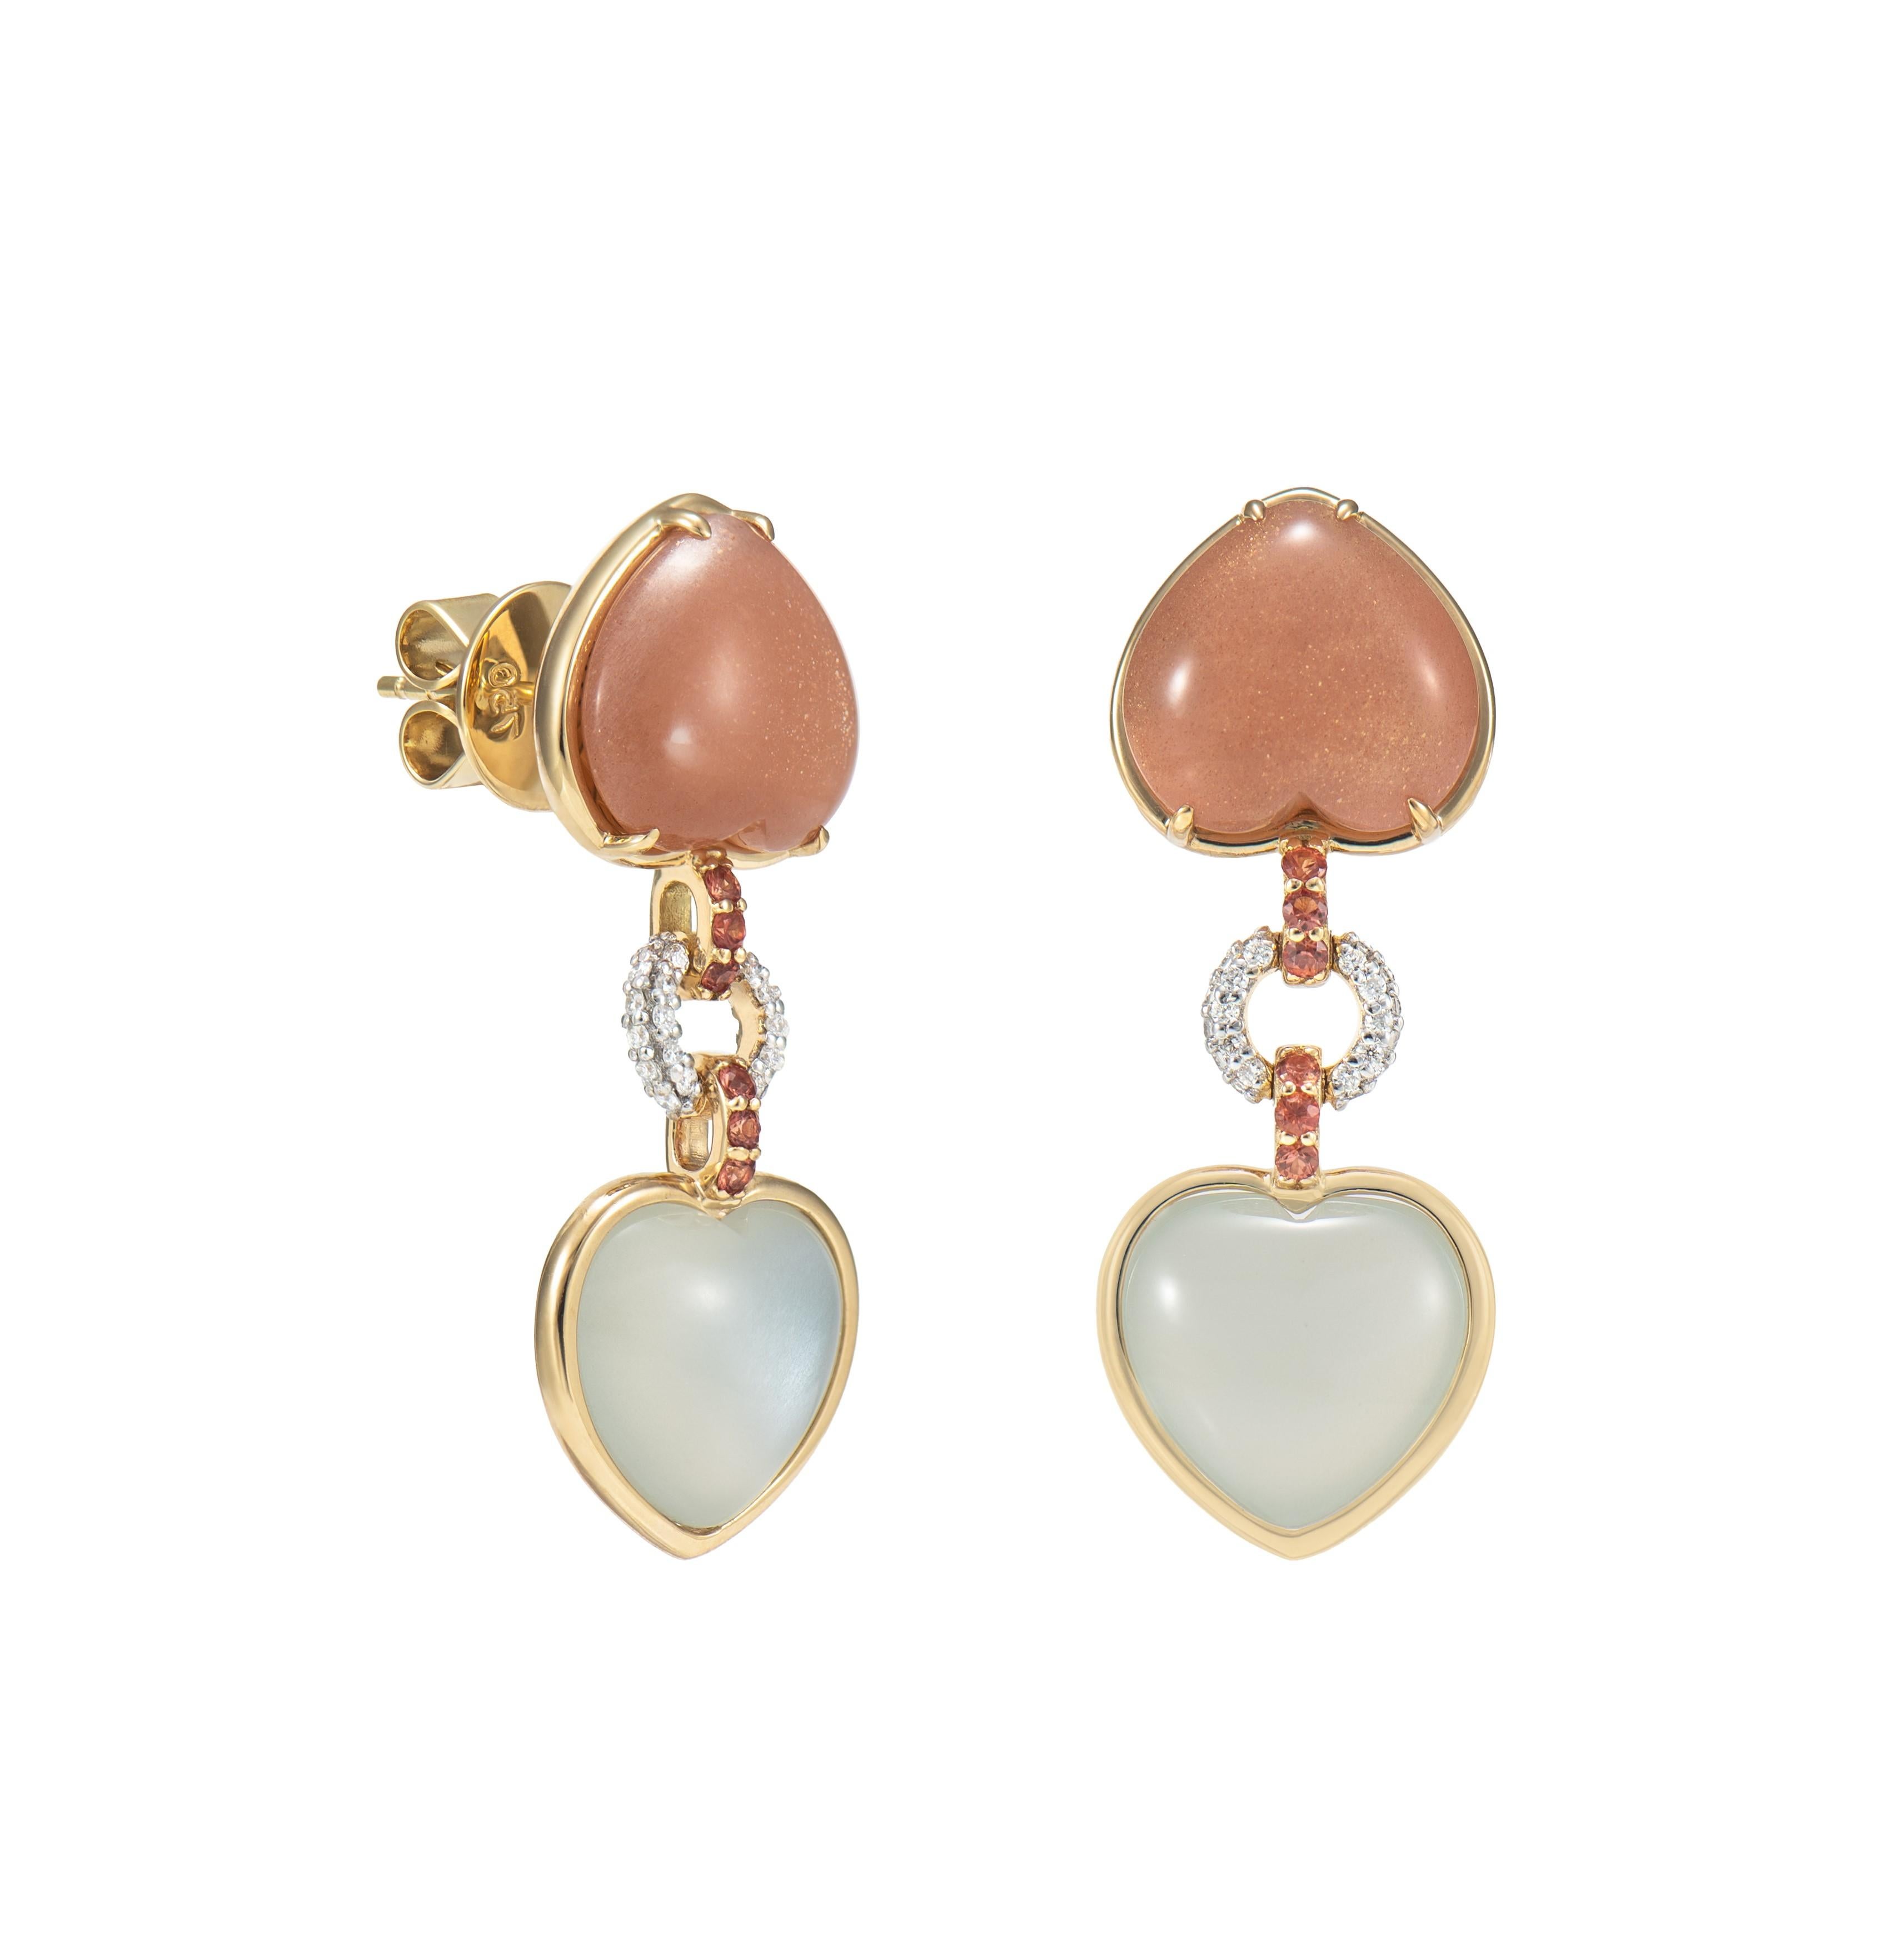 Celebrating the season of love with these delicate heart jewels! These pieces showcase beautiful gemstones with dainty accents to elevatue the beauty of the gem. 

White Moonstone and Orange Moonstone Drop Earring in 18 Karat Yellow Gold with Orange